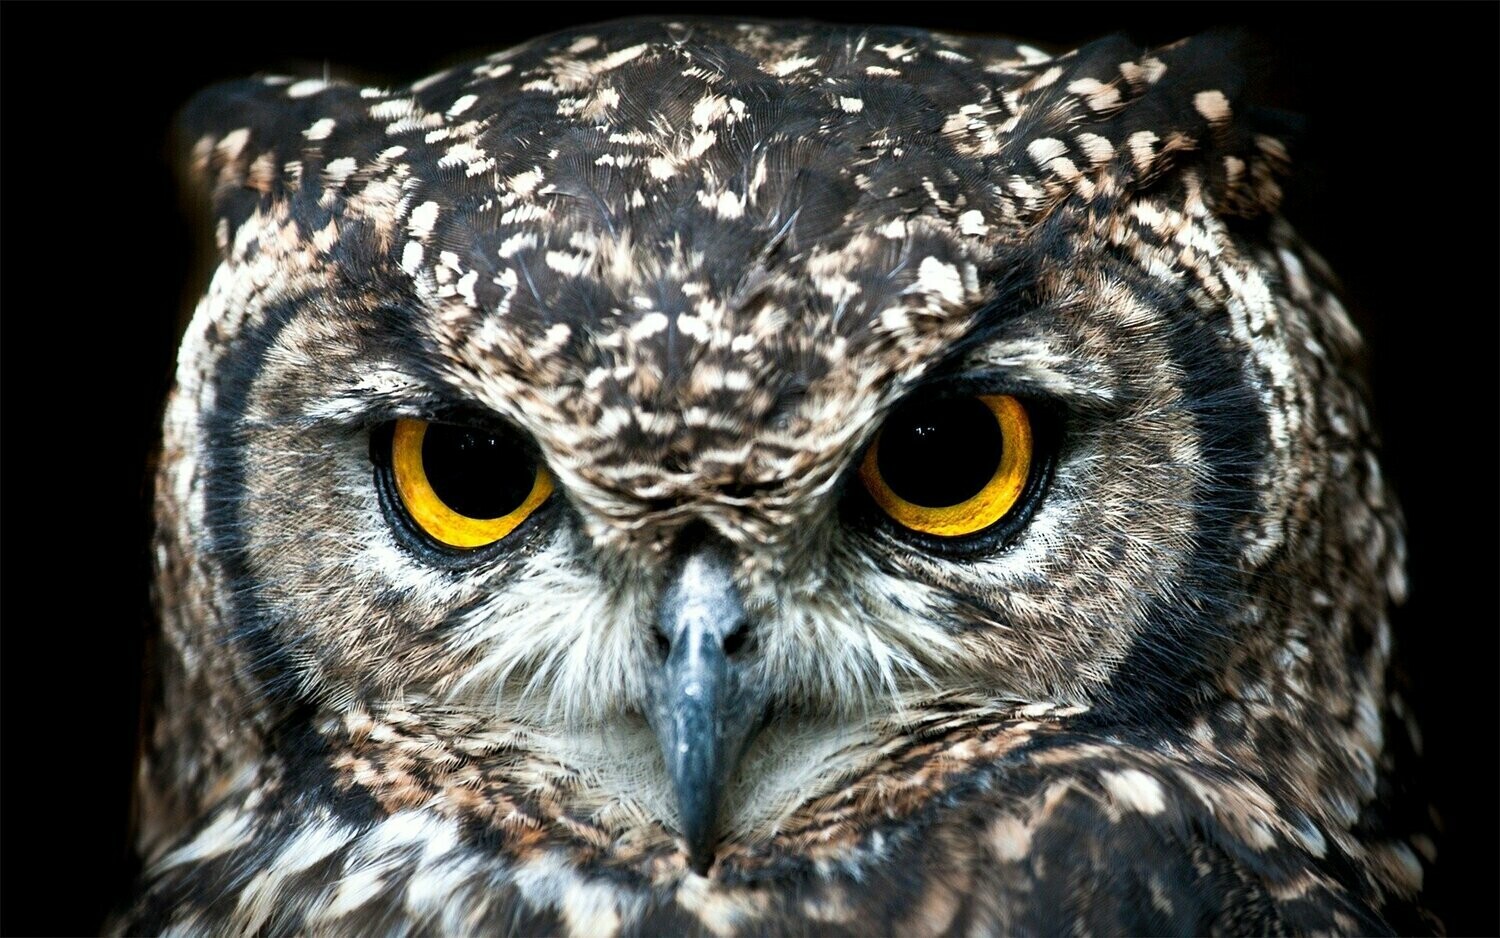 Spotted Eagle Owl - Specially ordered for you. Delivery is approximately 4 - 6 weeks.